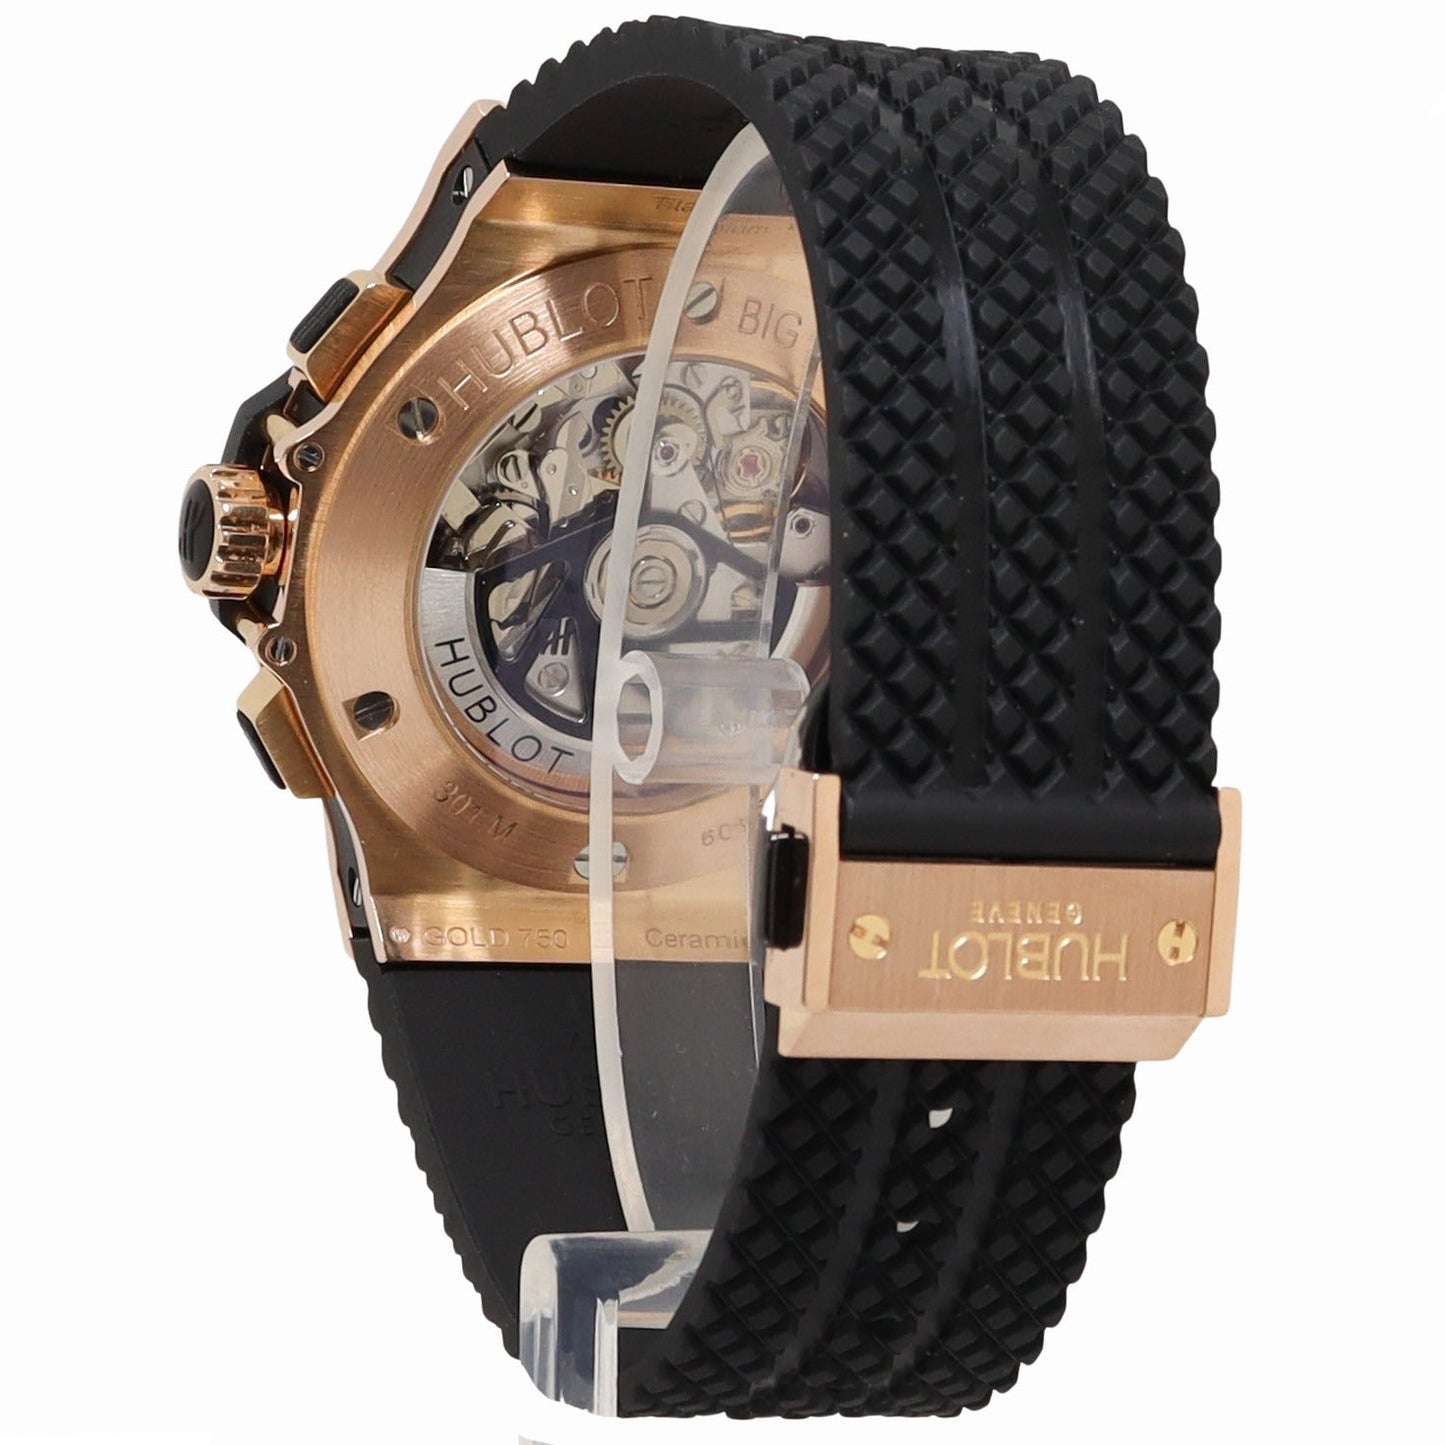 Load image into Gallery viewer, Hublot Big Bang Rose Gold 44mm Black Chronograph Dial Watch Reference#: 301.PB.131.RX - Happy Jewelers Fine Jewelry Lifetime Warranty
